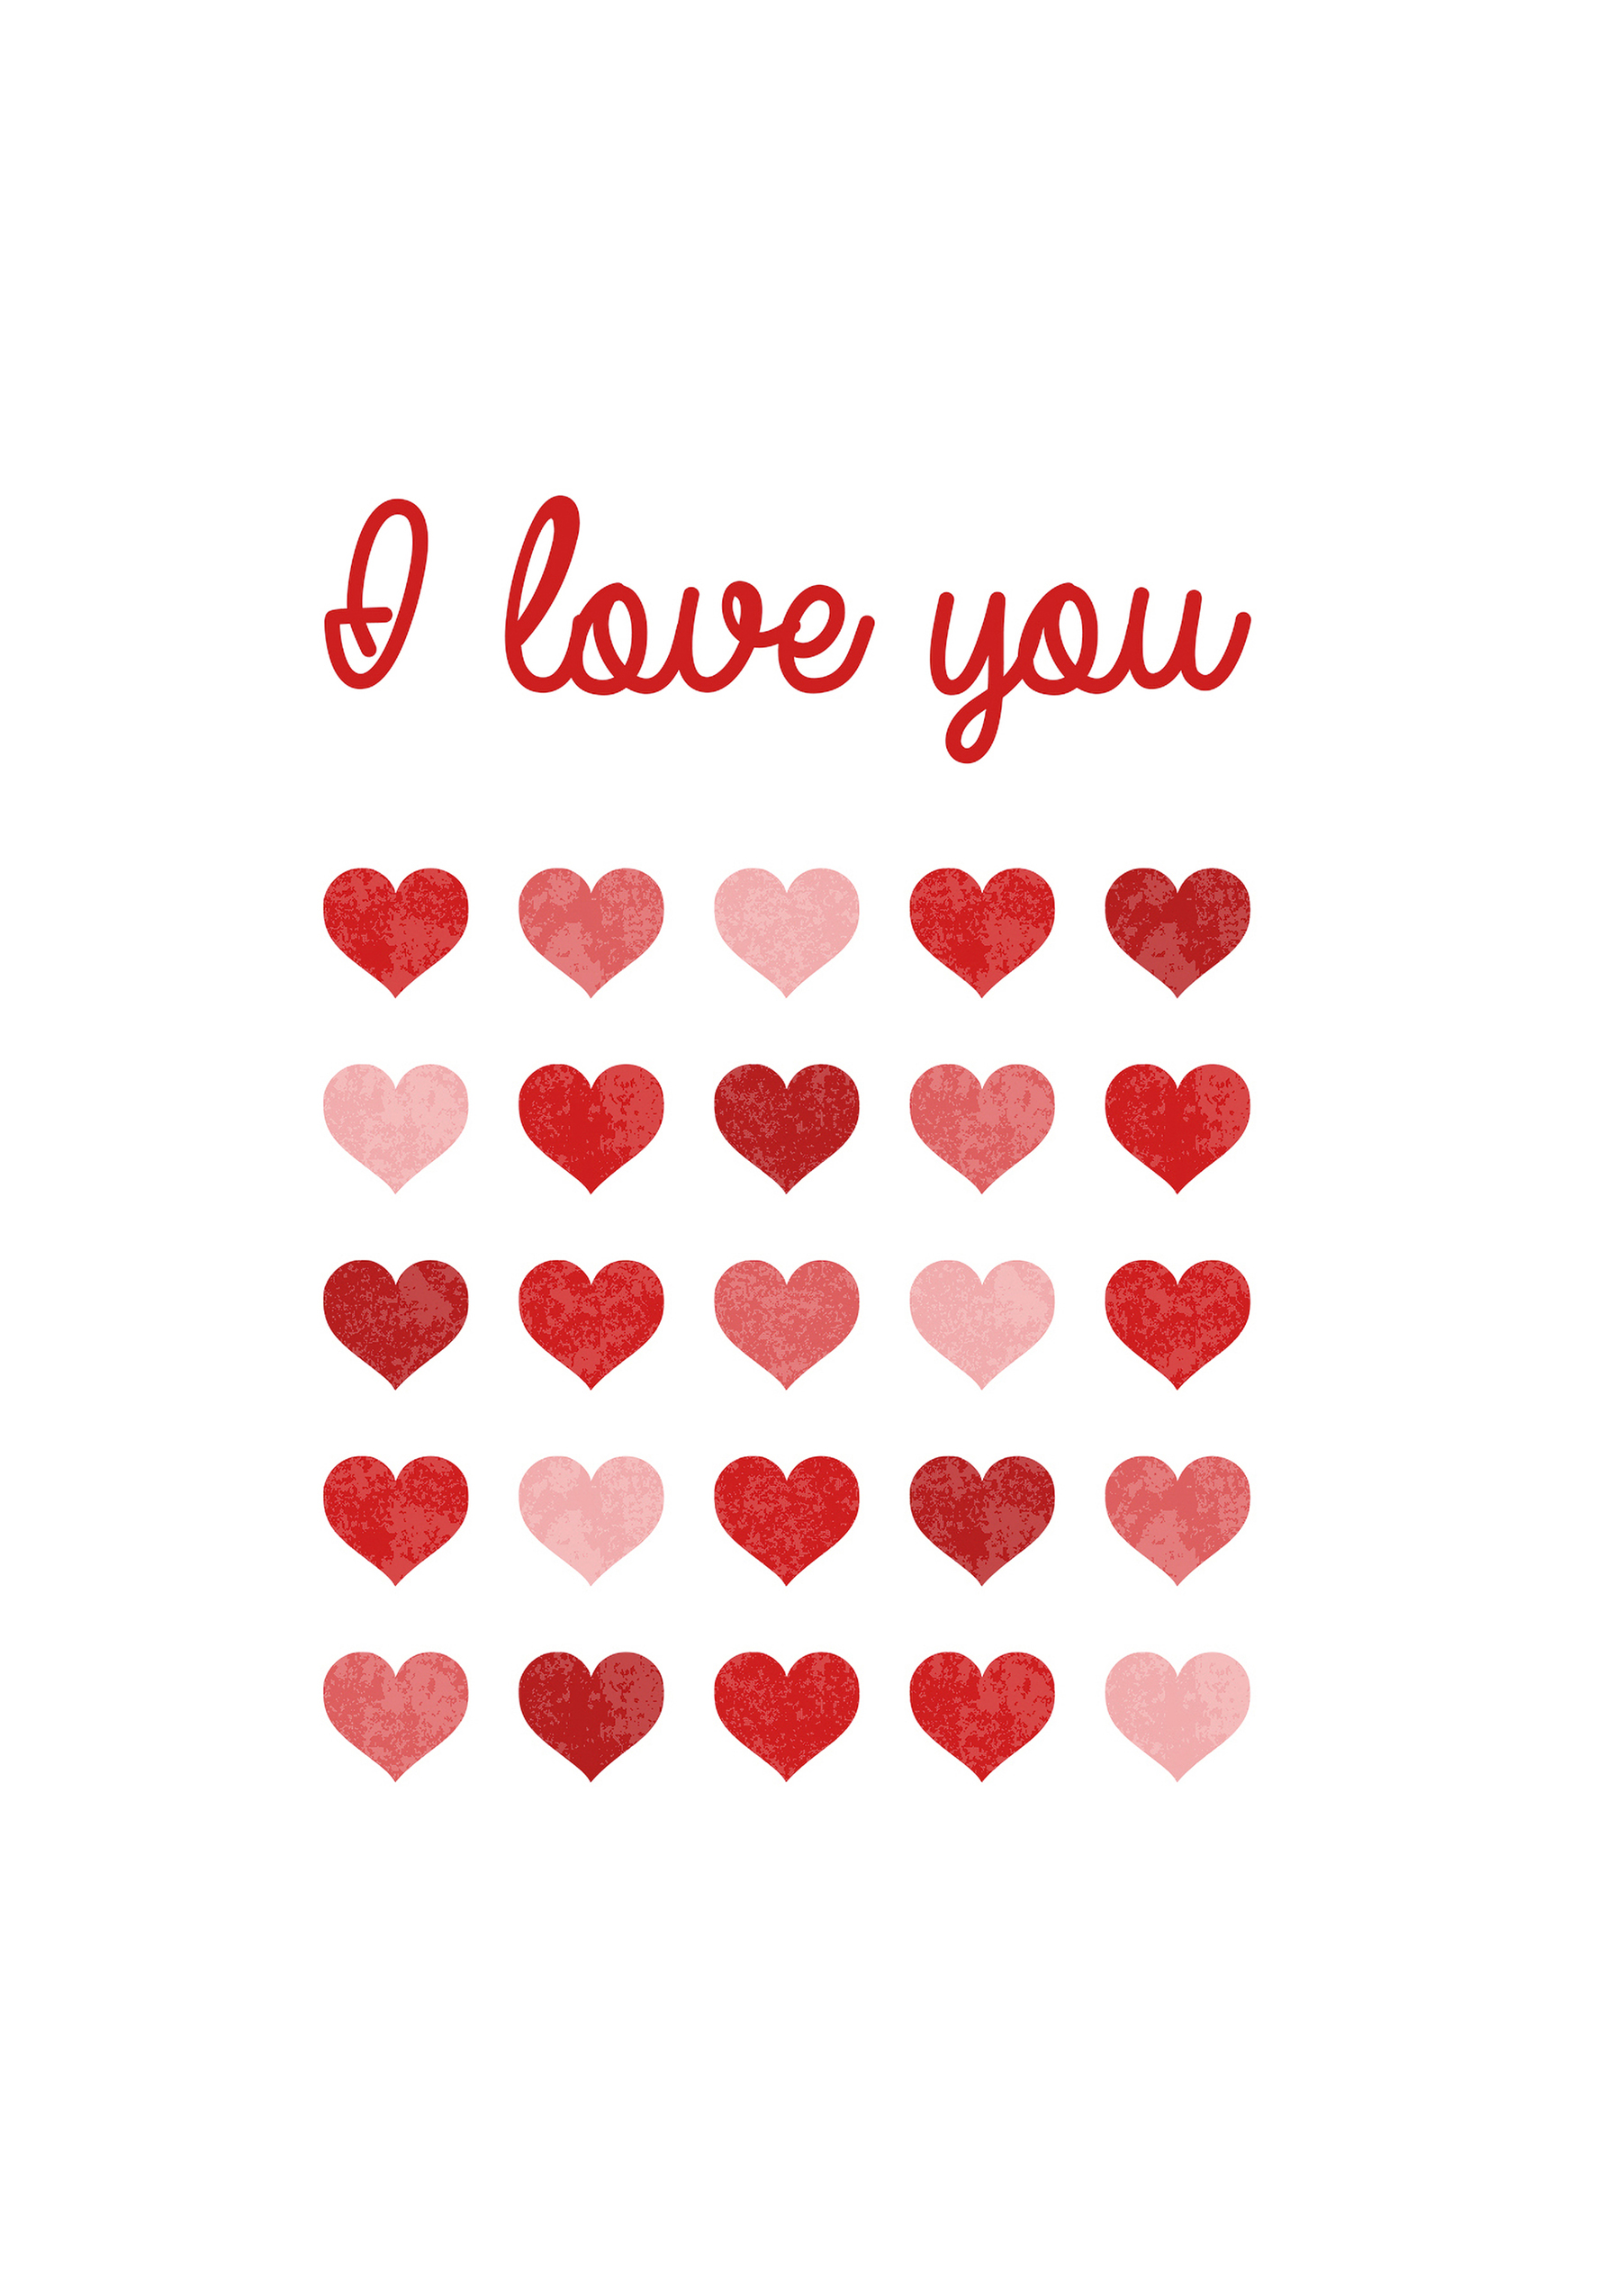 I Love You Hearts Greetings Cards Delivered Bunches